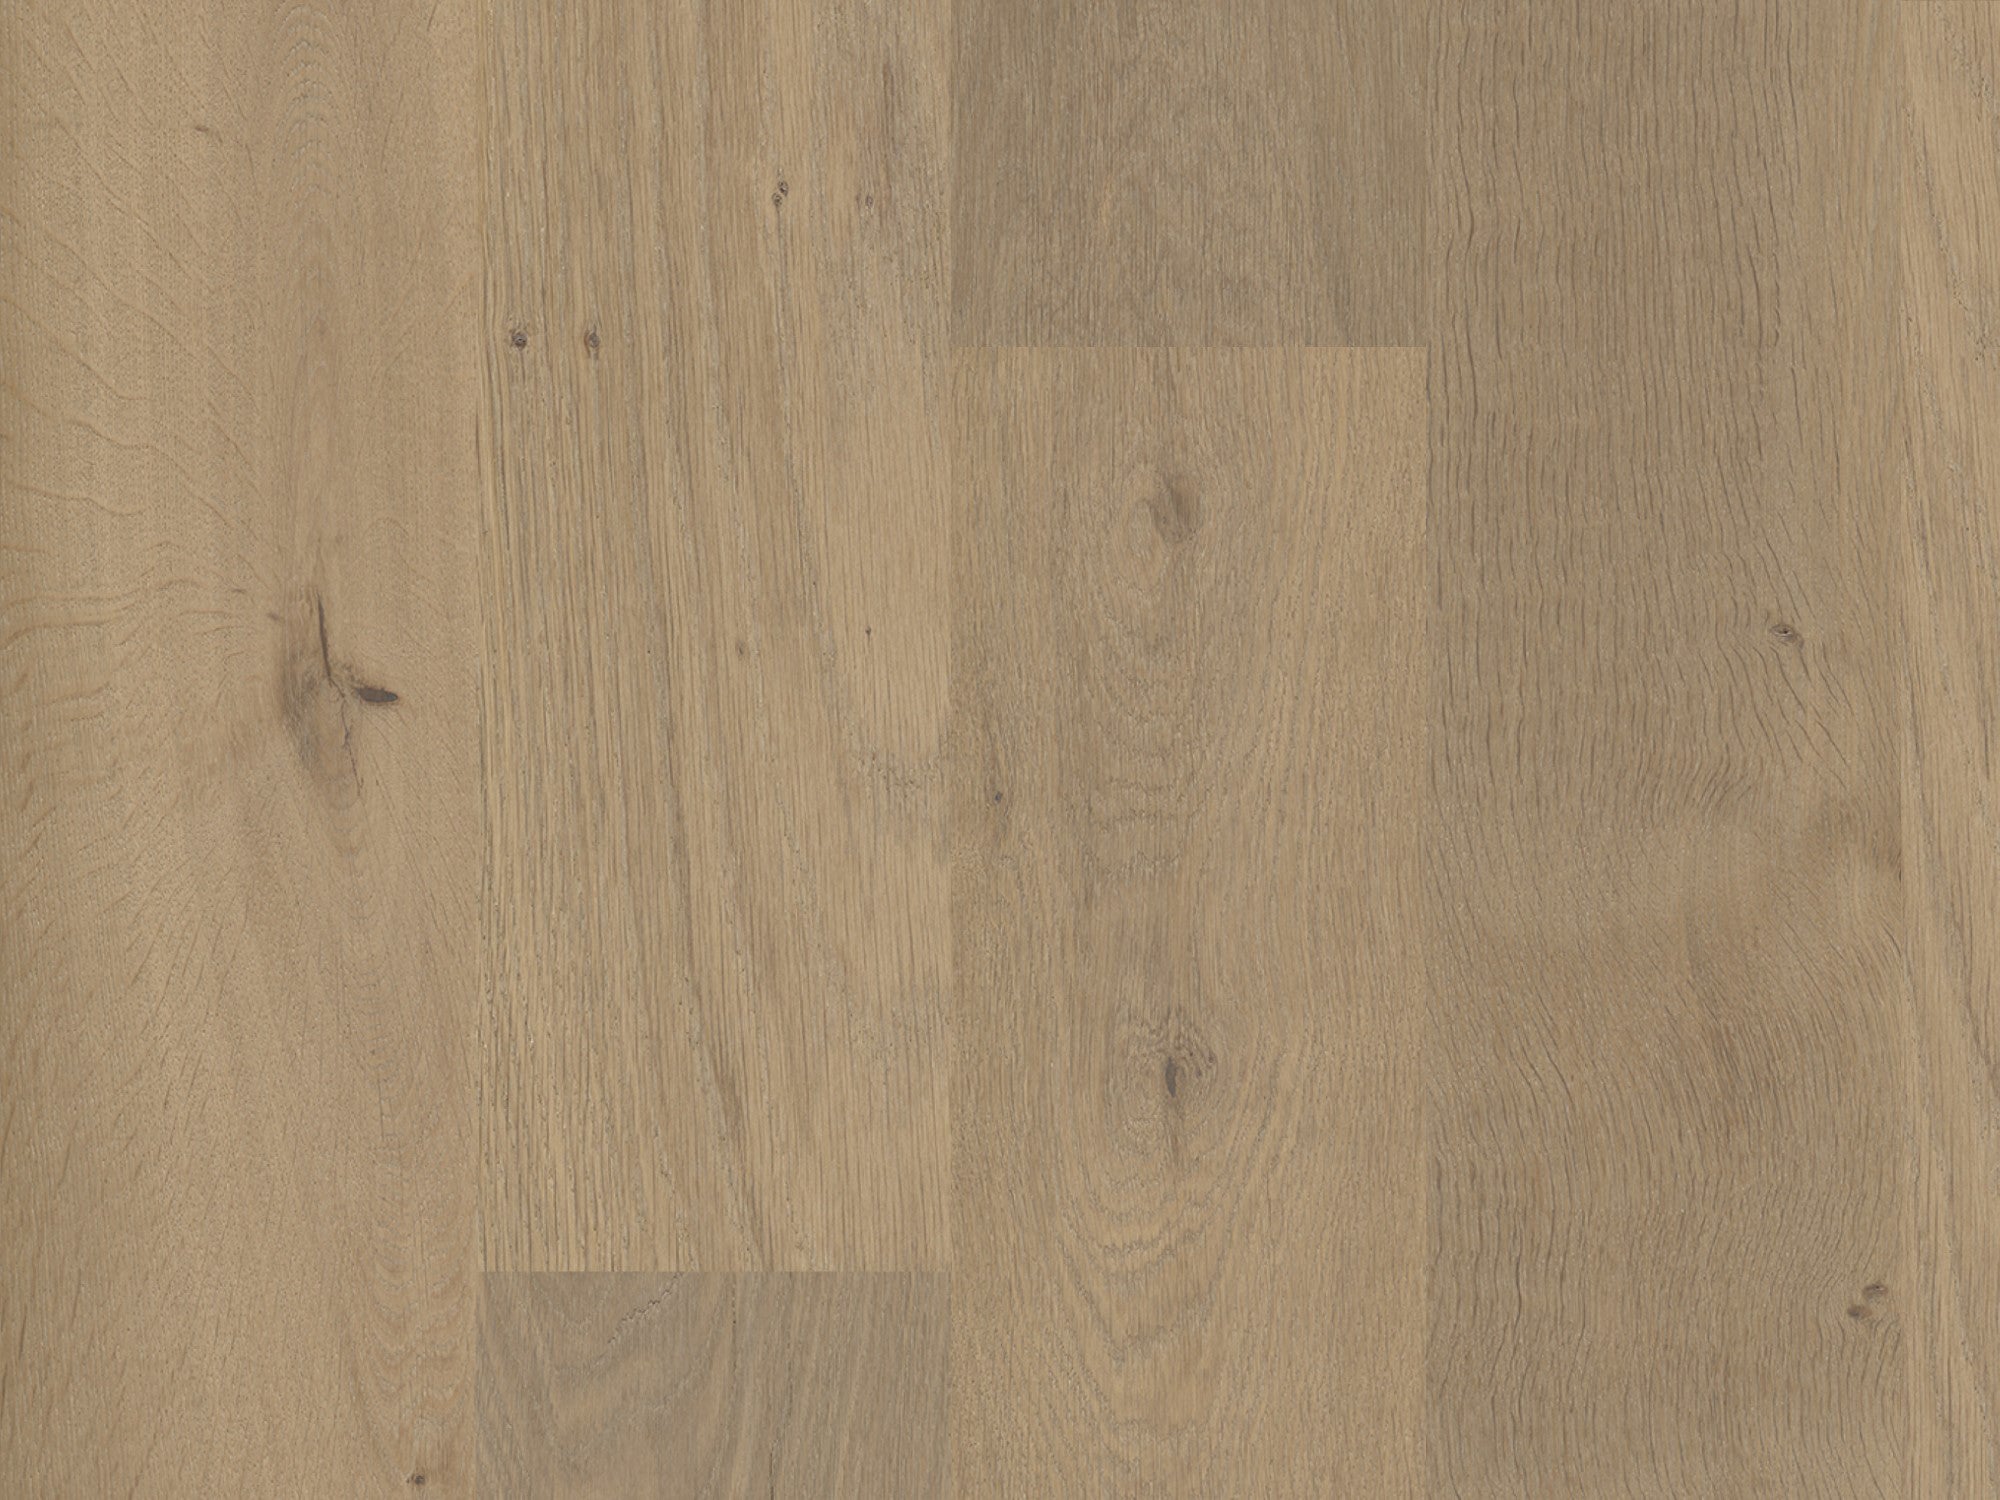 duchateau signature terra savanna european oak engineered hardnatural wood floor uv lacquer finish for interior use distributed by surface group international